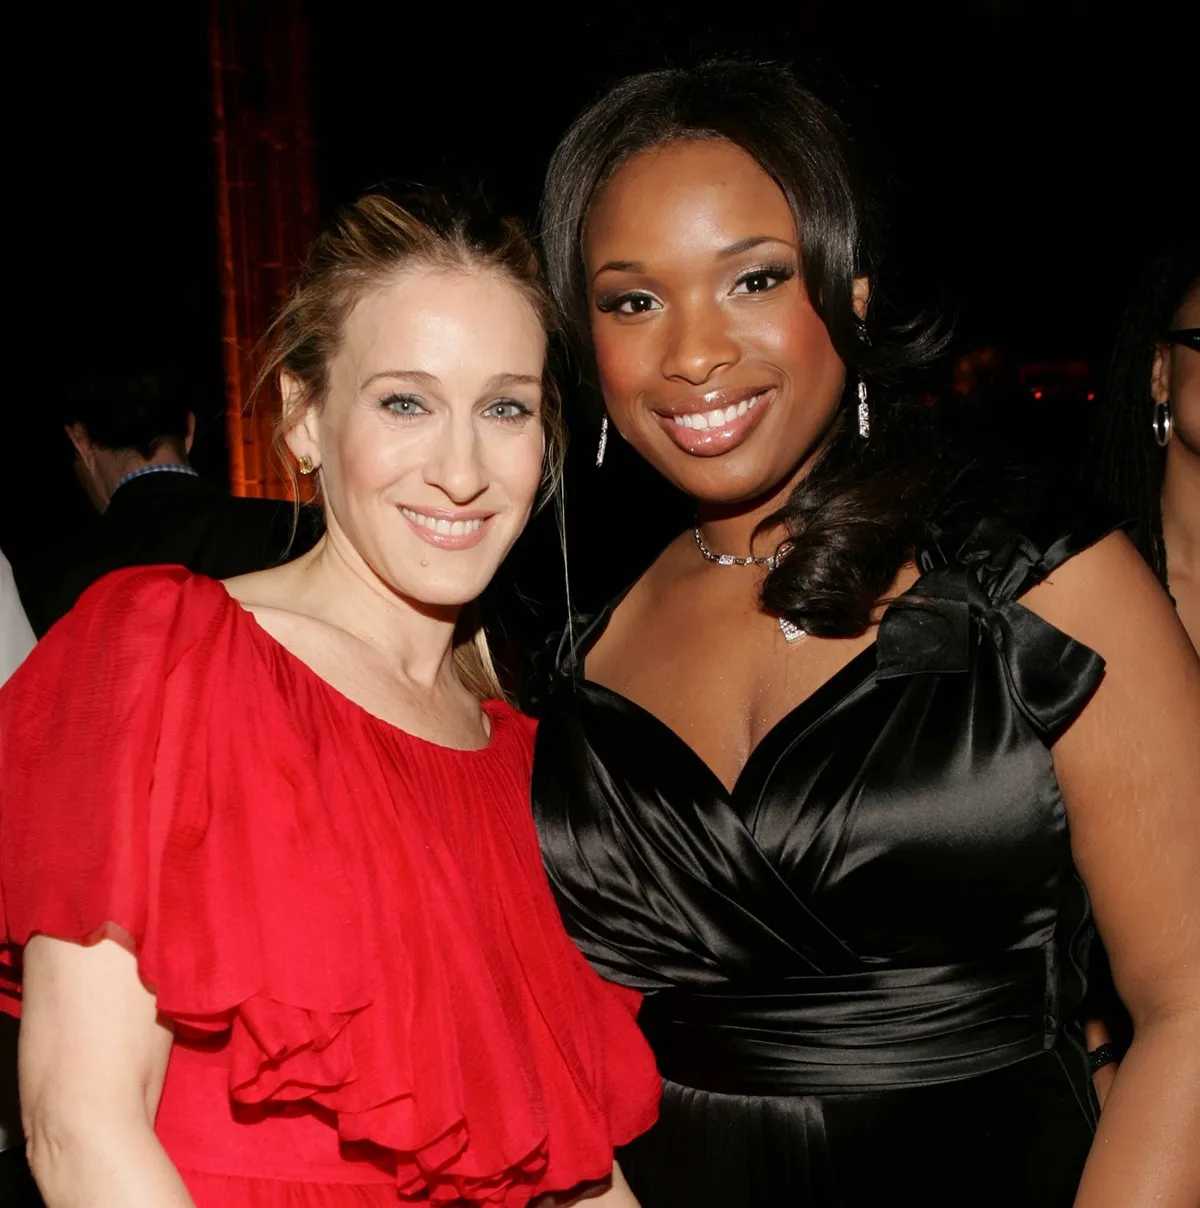 Sarah Jessica Parker and Jennifer Hudson attend the 2006 National Board Of Review Awards Presented by BVLGARI at Cipriani 42nd Street January 9, 2007 in New York City